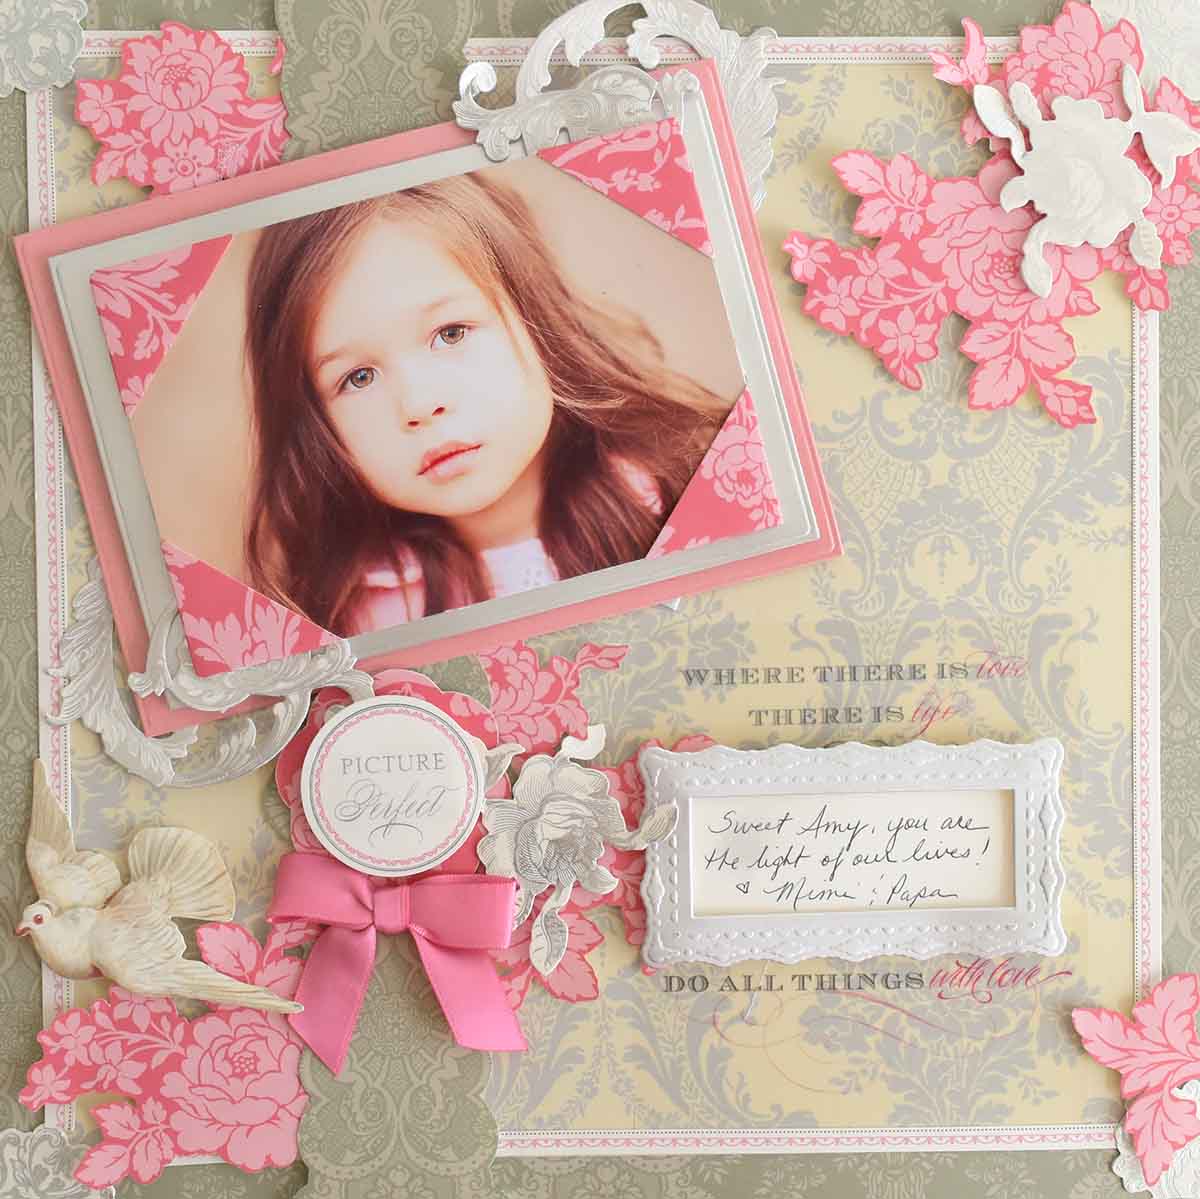 a card with a picture of a little girl.